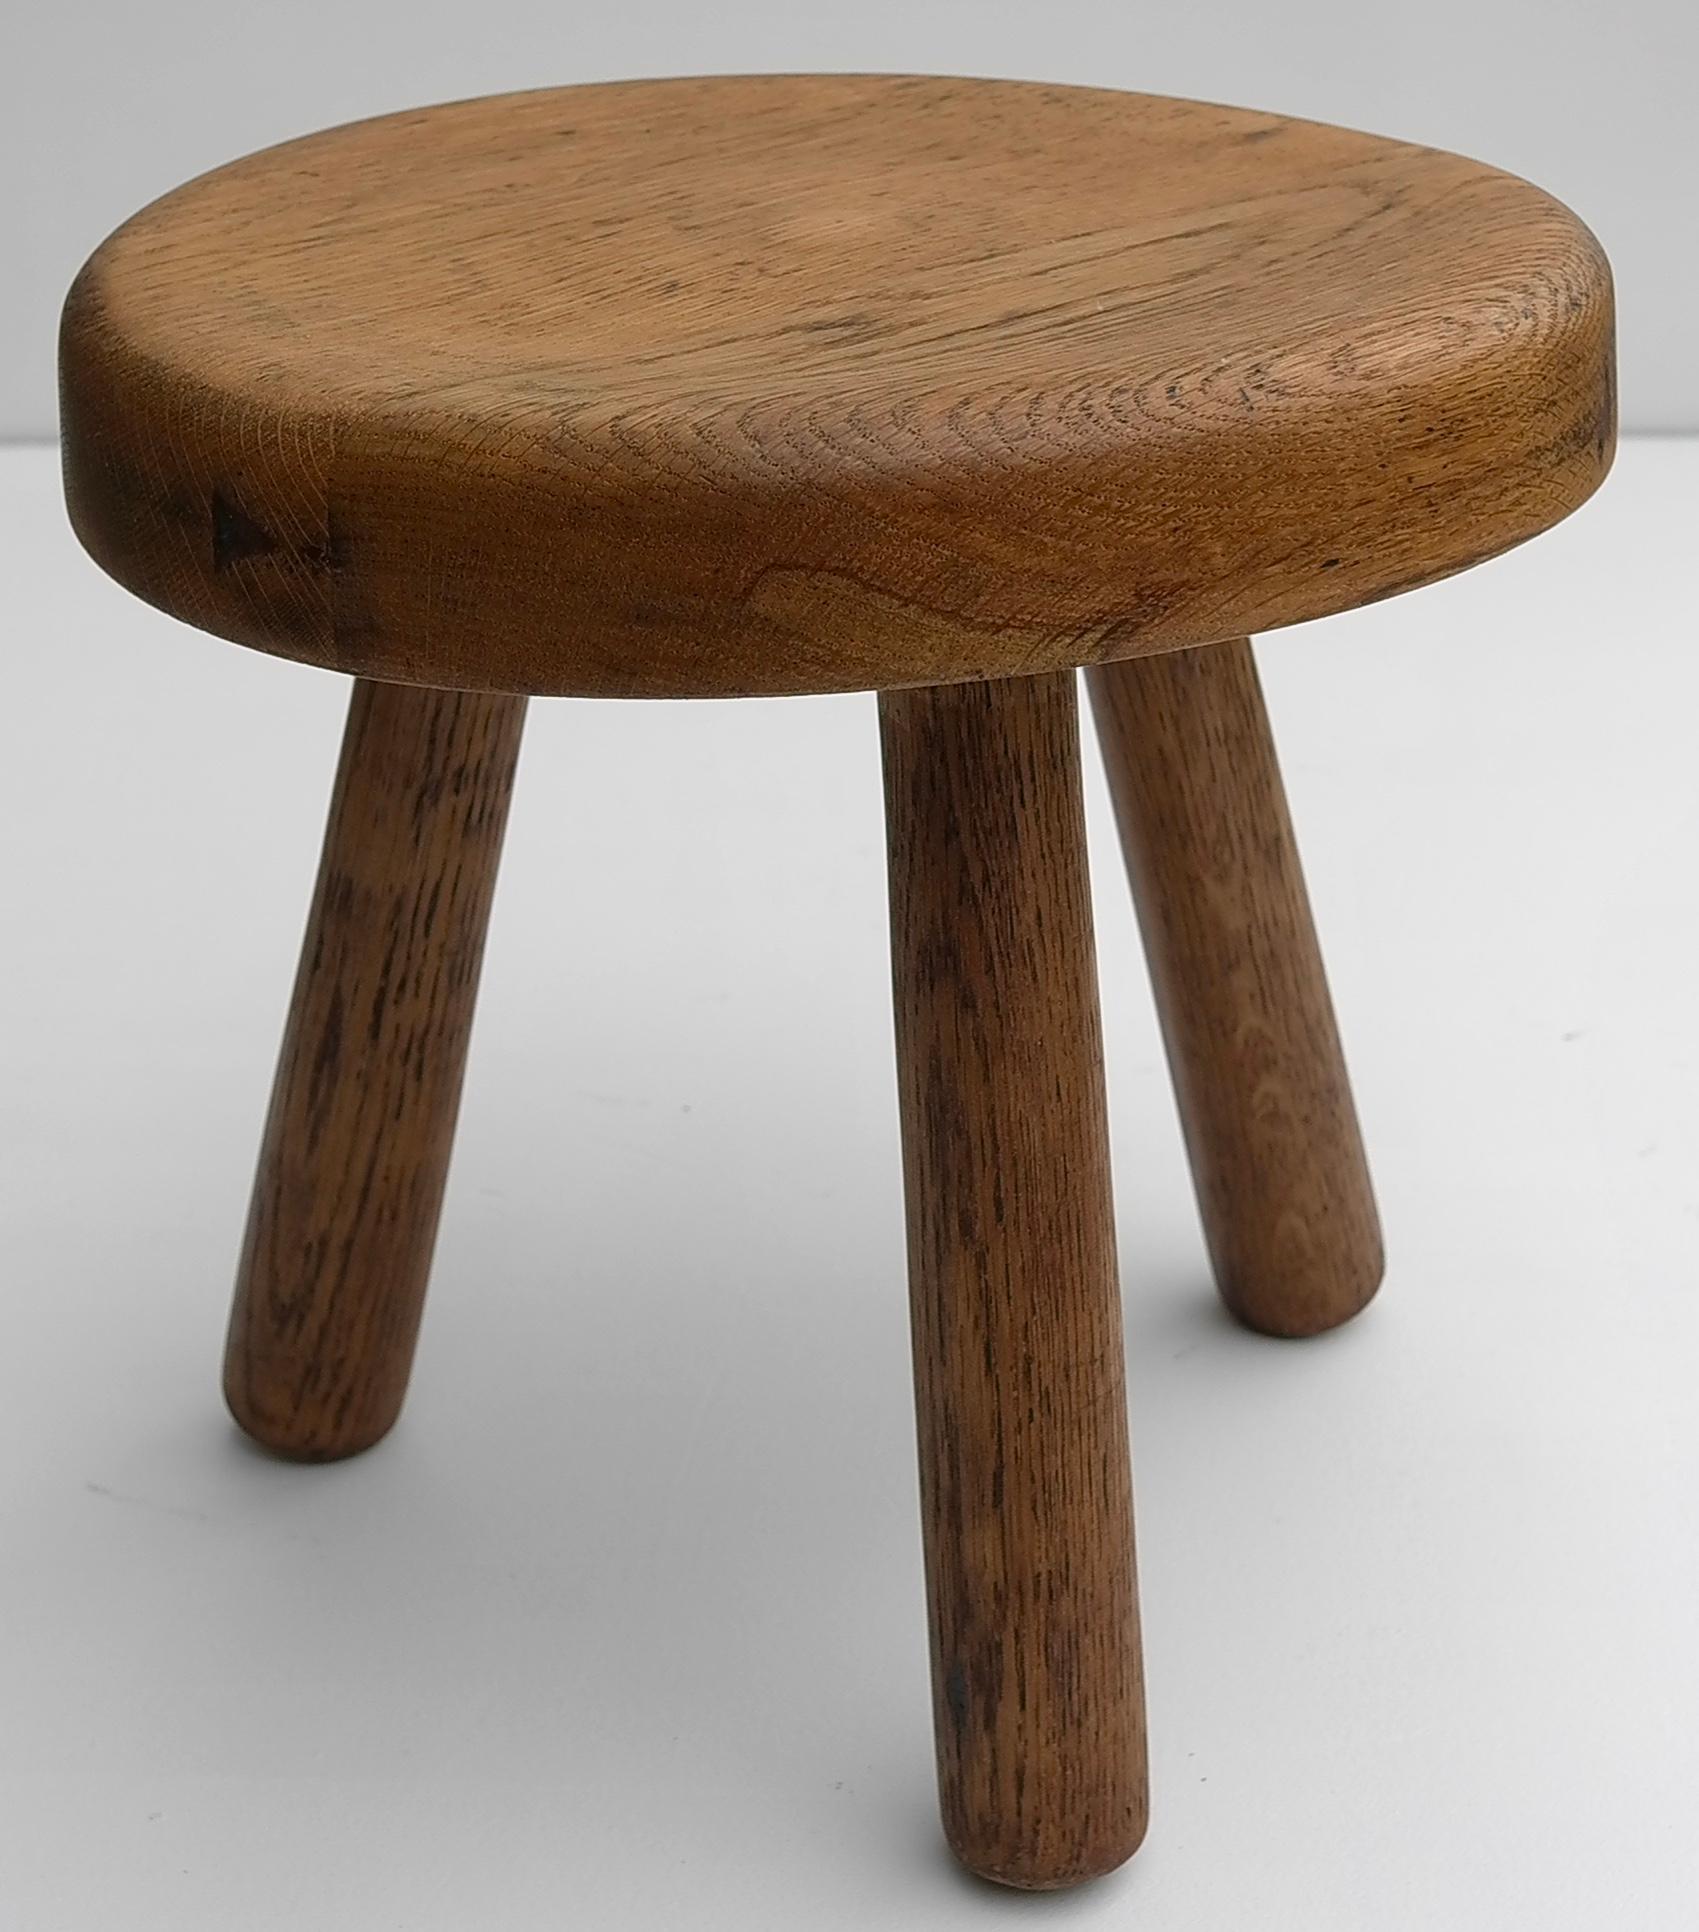 Solid oak stool in style of Charlotte Perriand, France 1950's.